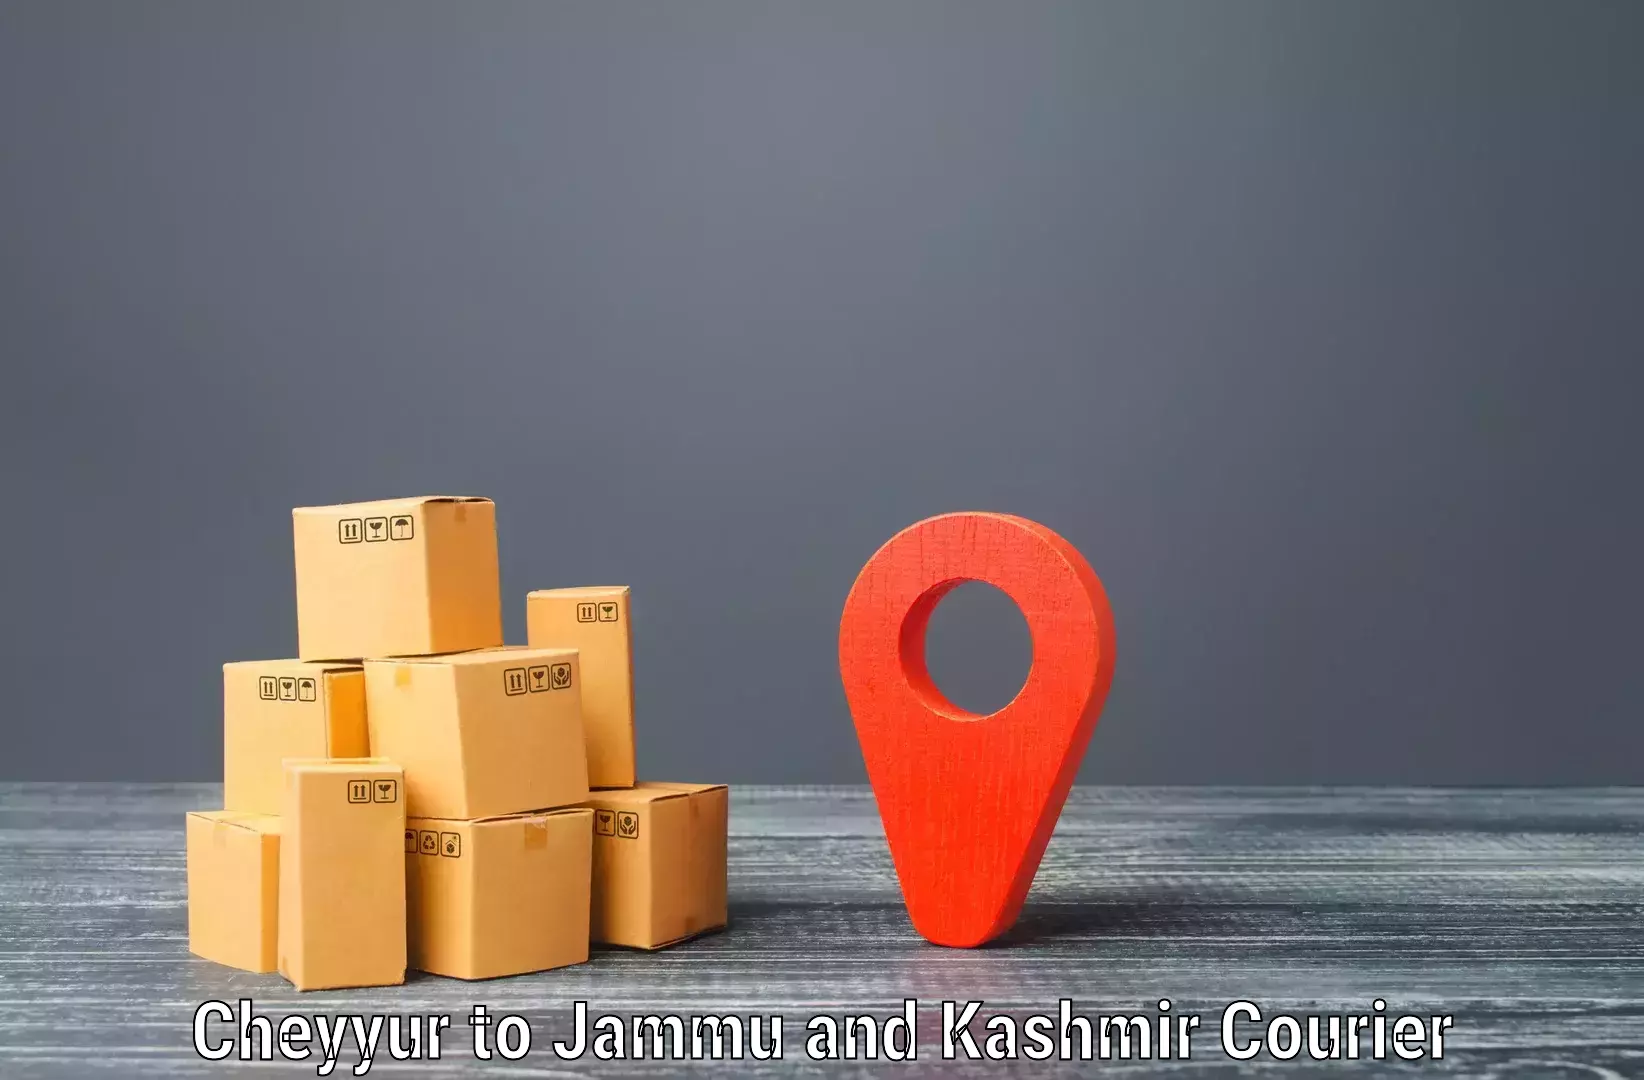 High-quality delivery services Cheyyur to Katra